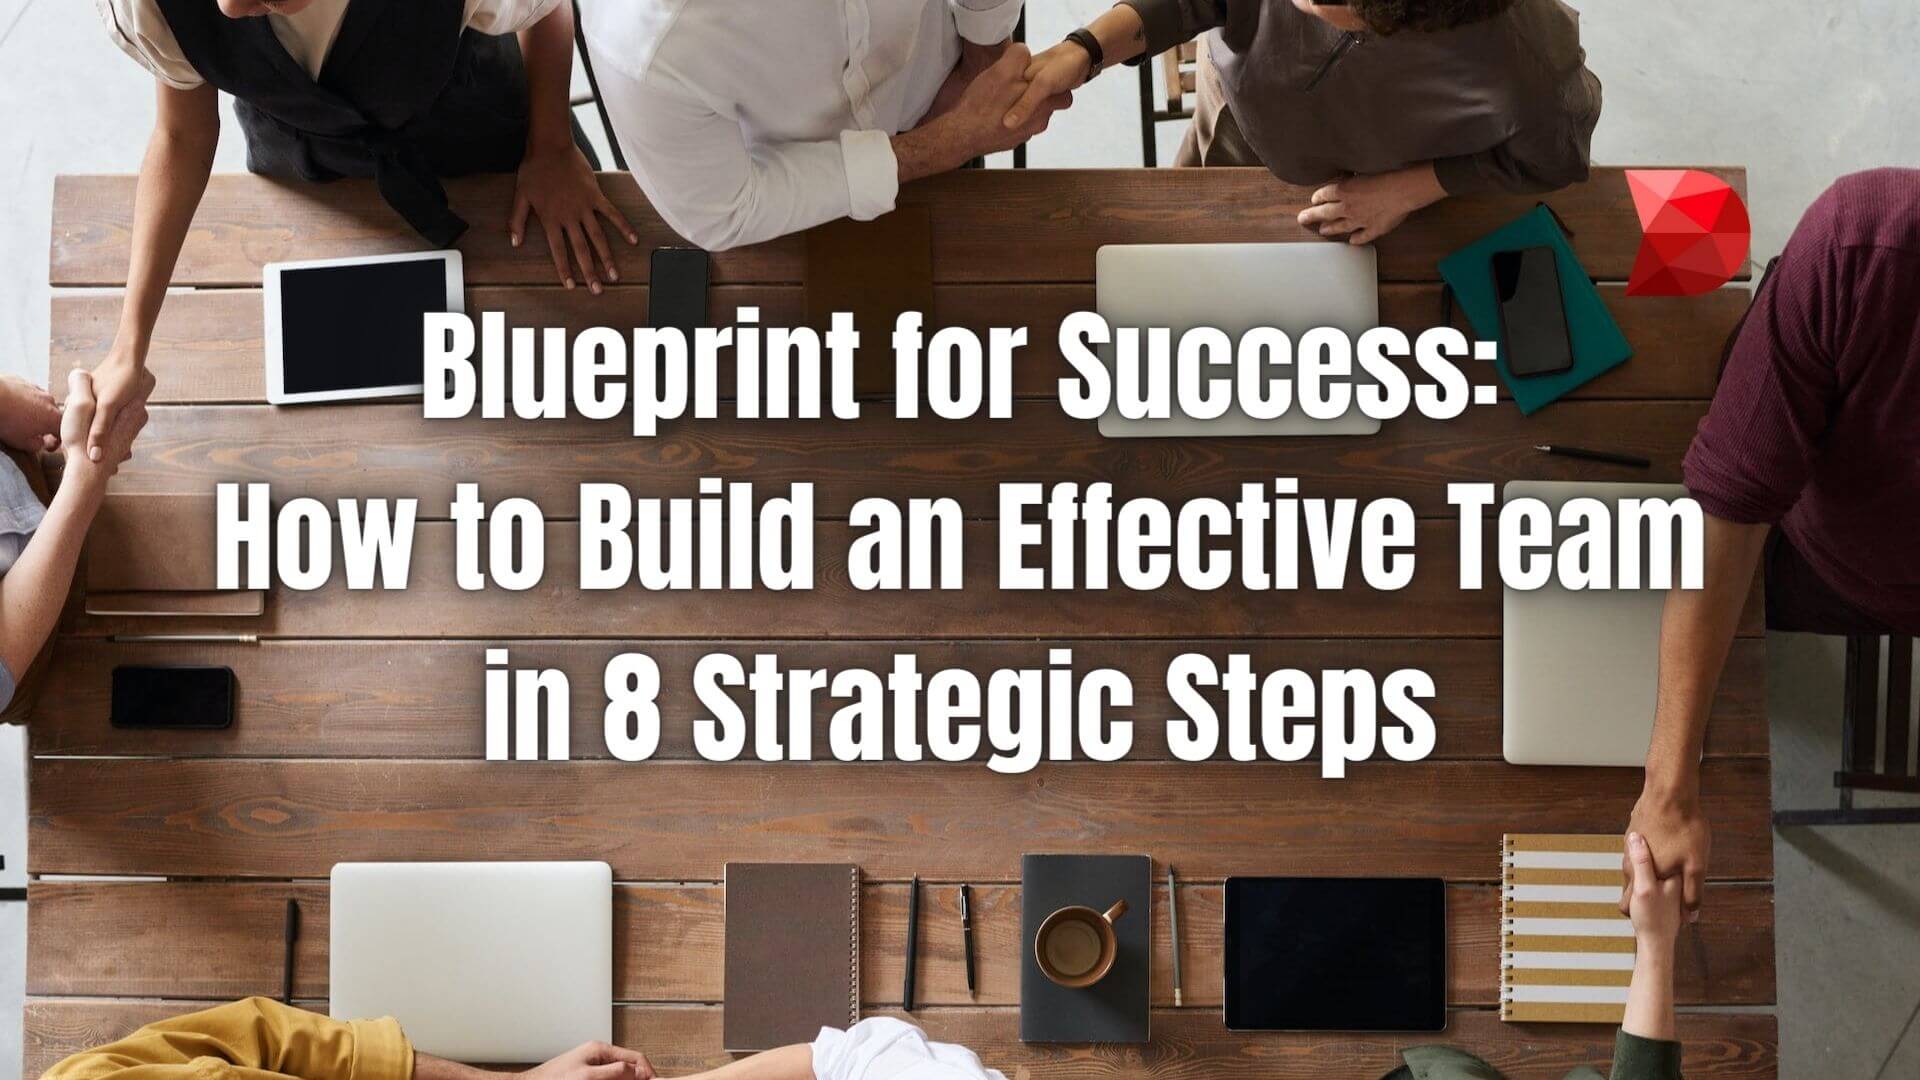 Master team-building with our 8-step guide! Click here to learn how to strategically build a robust and effective team dynamic today.